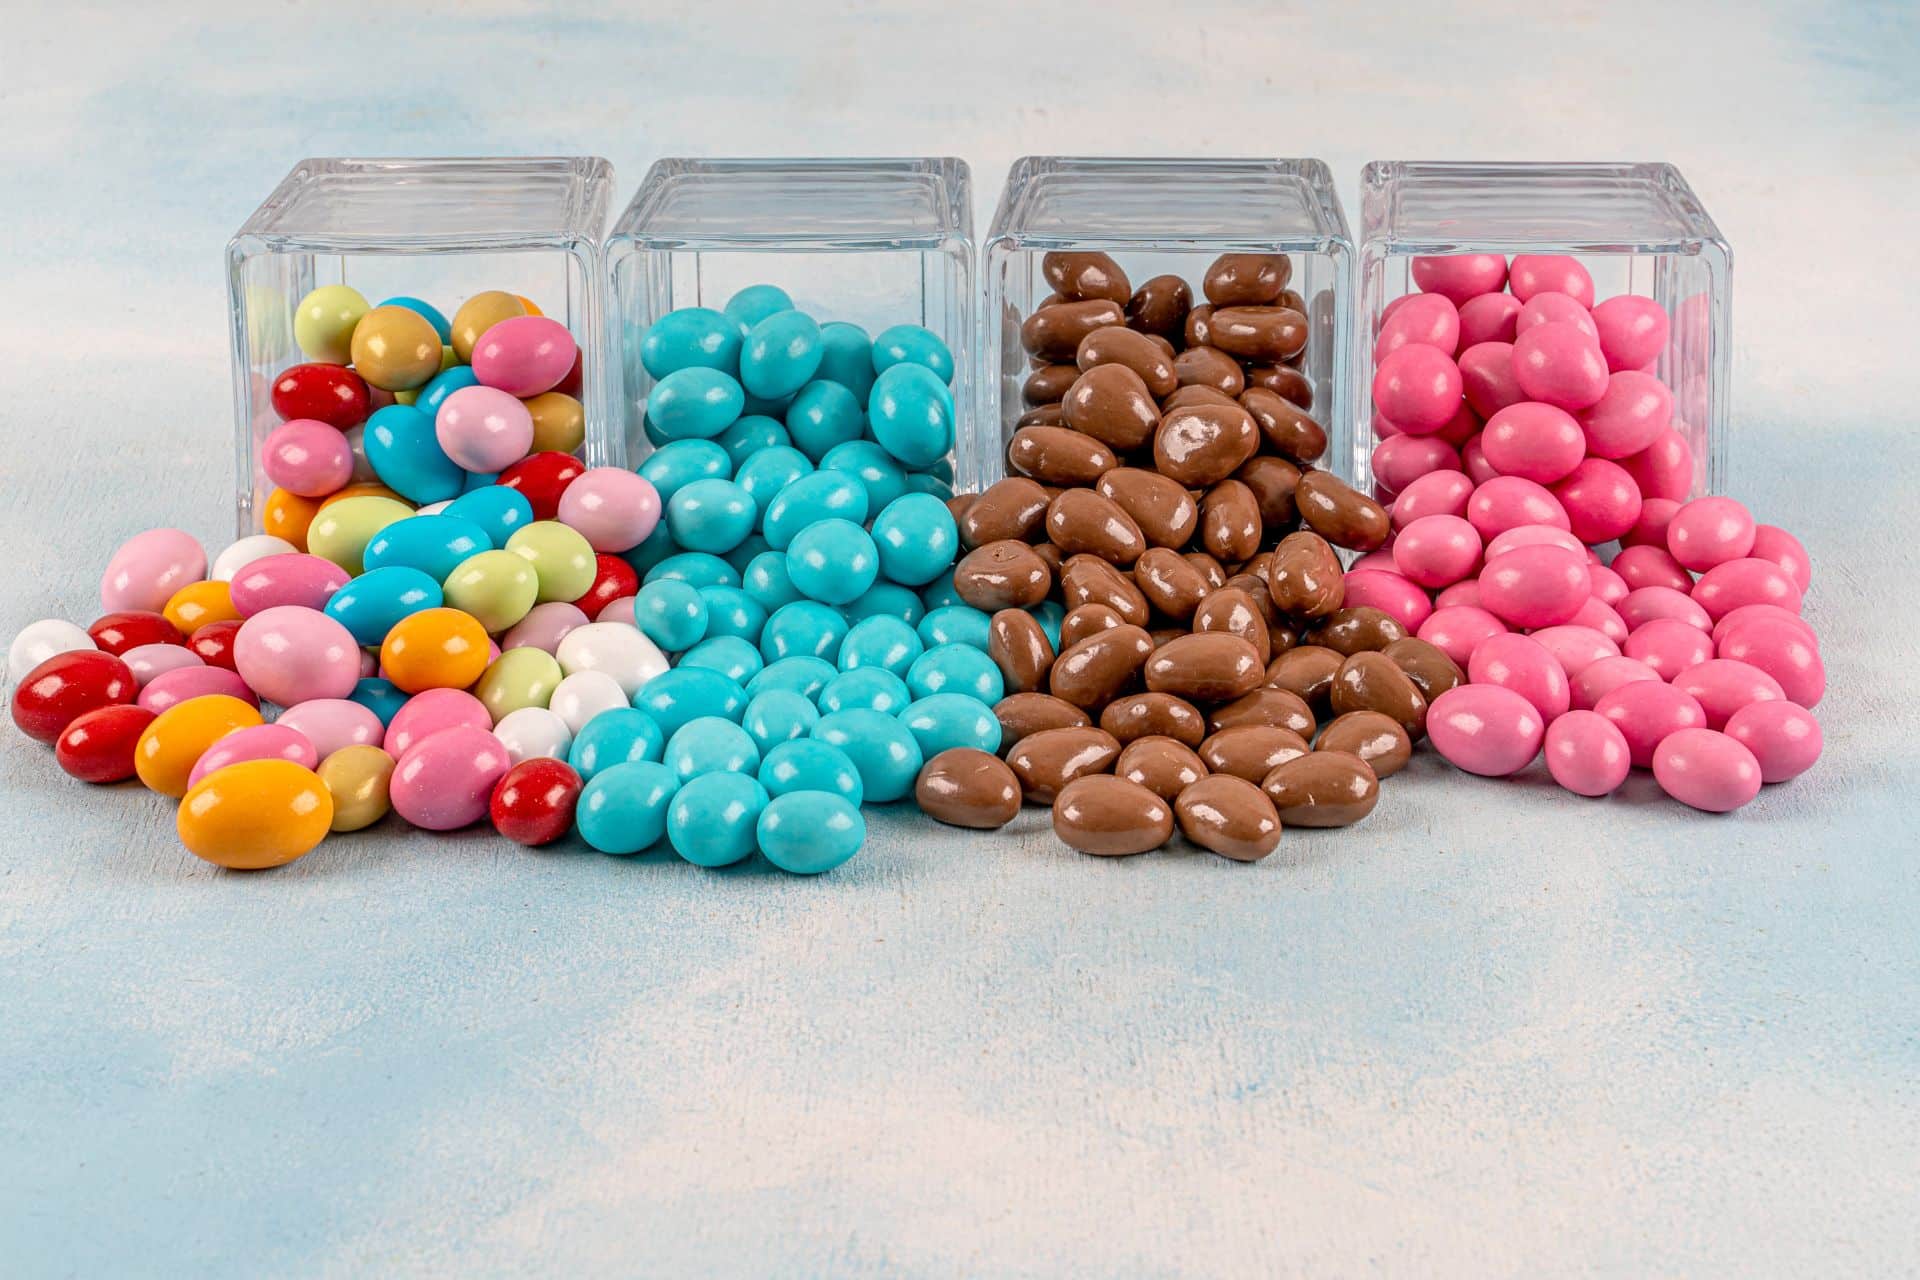 Ingredients For Confectionary Products